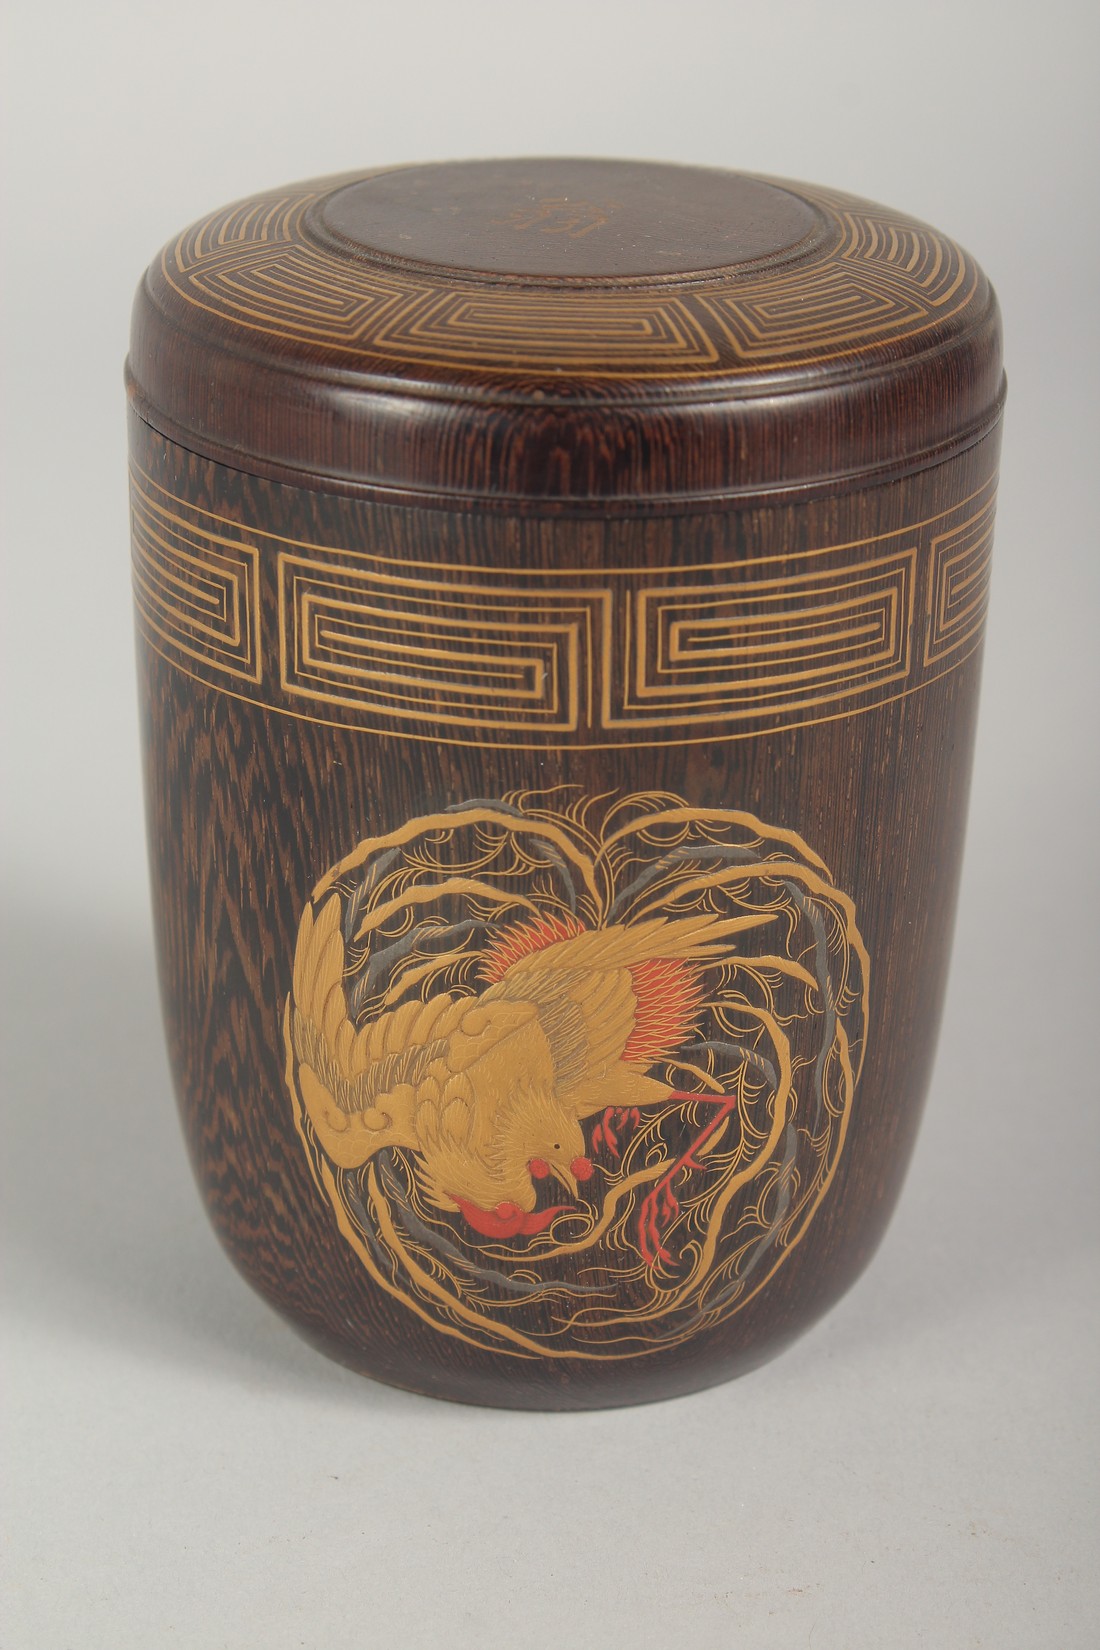 A FINE JAPANESE TURNED WOOD NATSUME / TEA CADDY, with a band of gilded key decoration to the lid and - Image 3 of 9